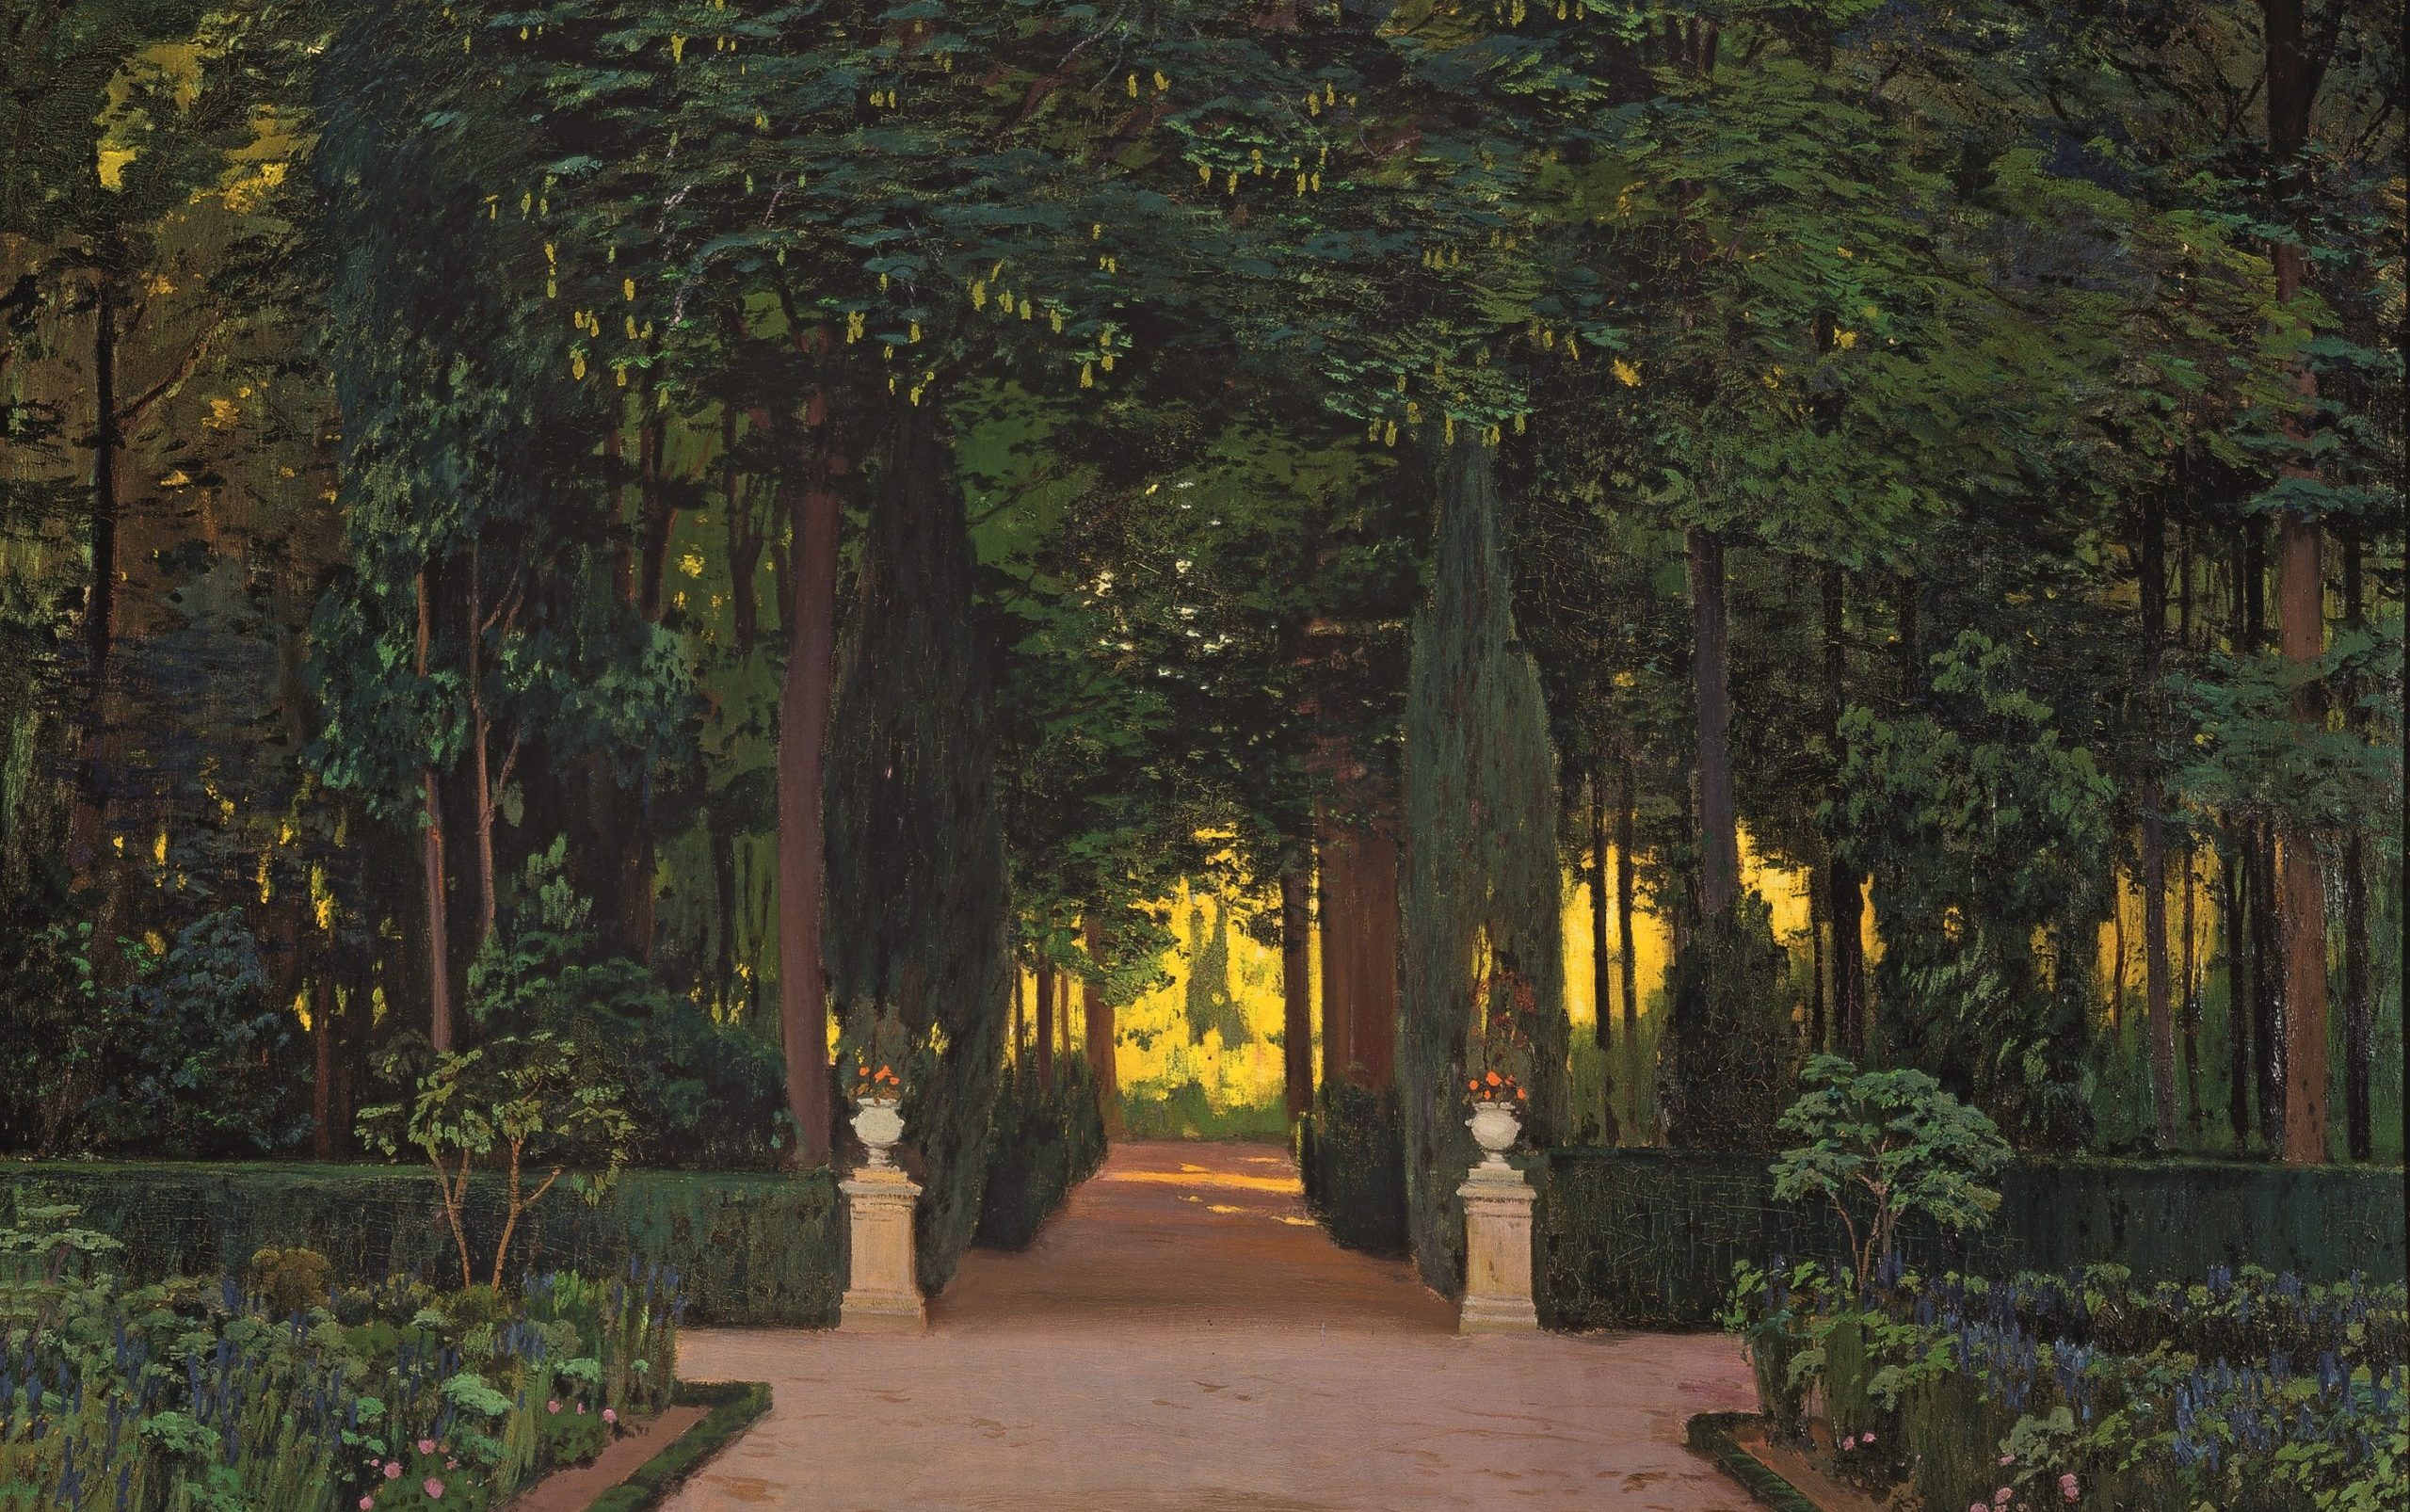 Rusiñol's painting of a garden view depicting a hedge maze with a sculpture in the center with trees. and filtered sunlight in the distance.